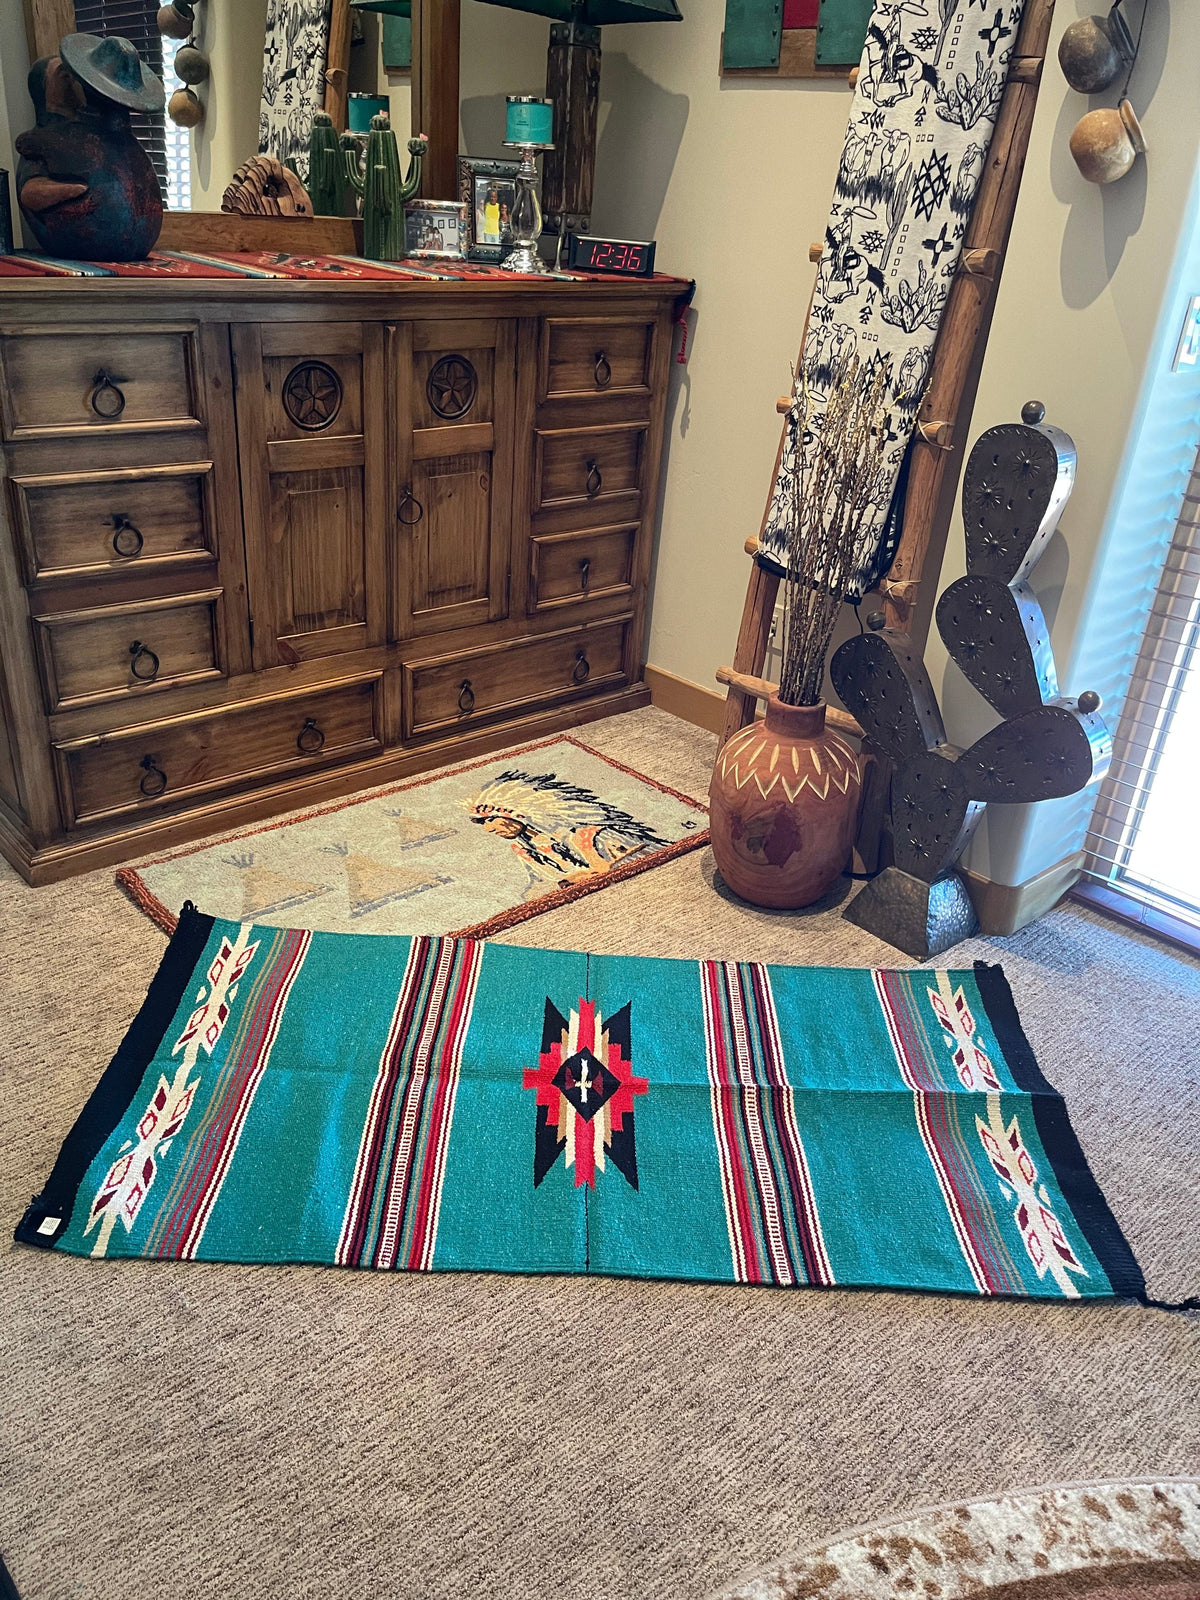 Large CANTINA Azteca rug   Teal Southwest Bedazzle home decor